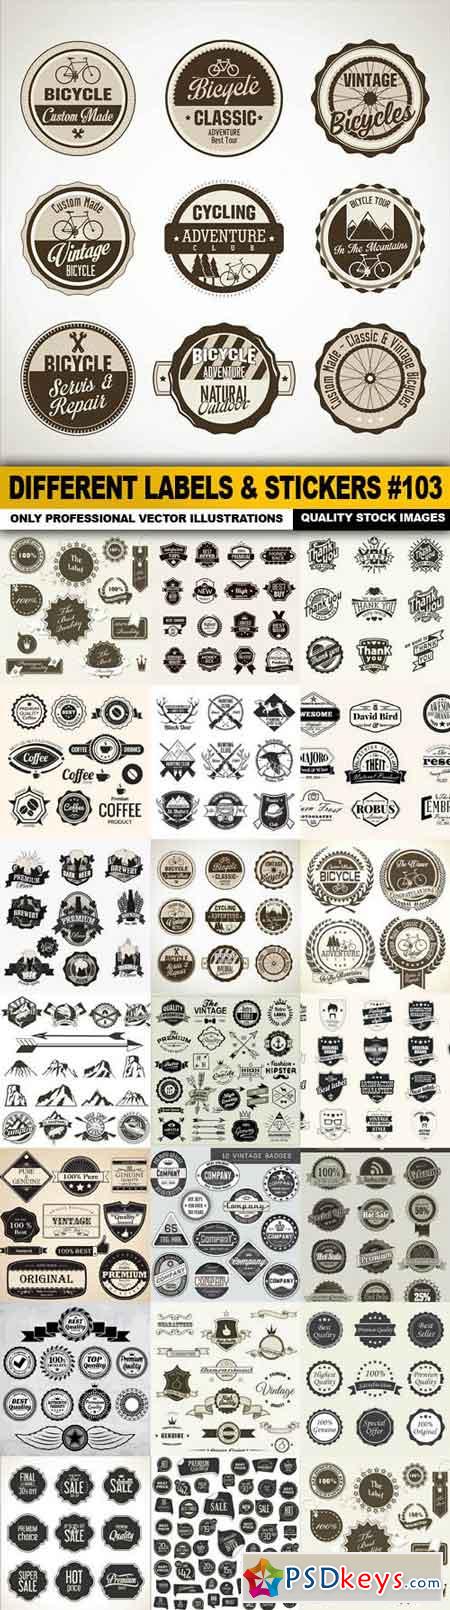 Different Labels & Stickers #103 - 20 Vector